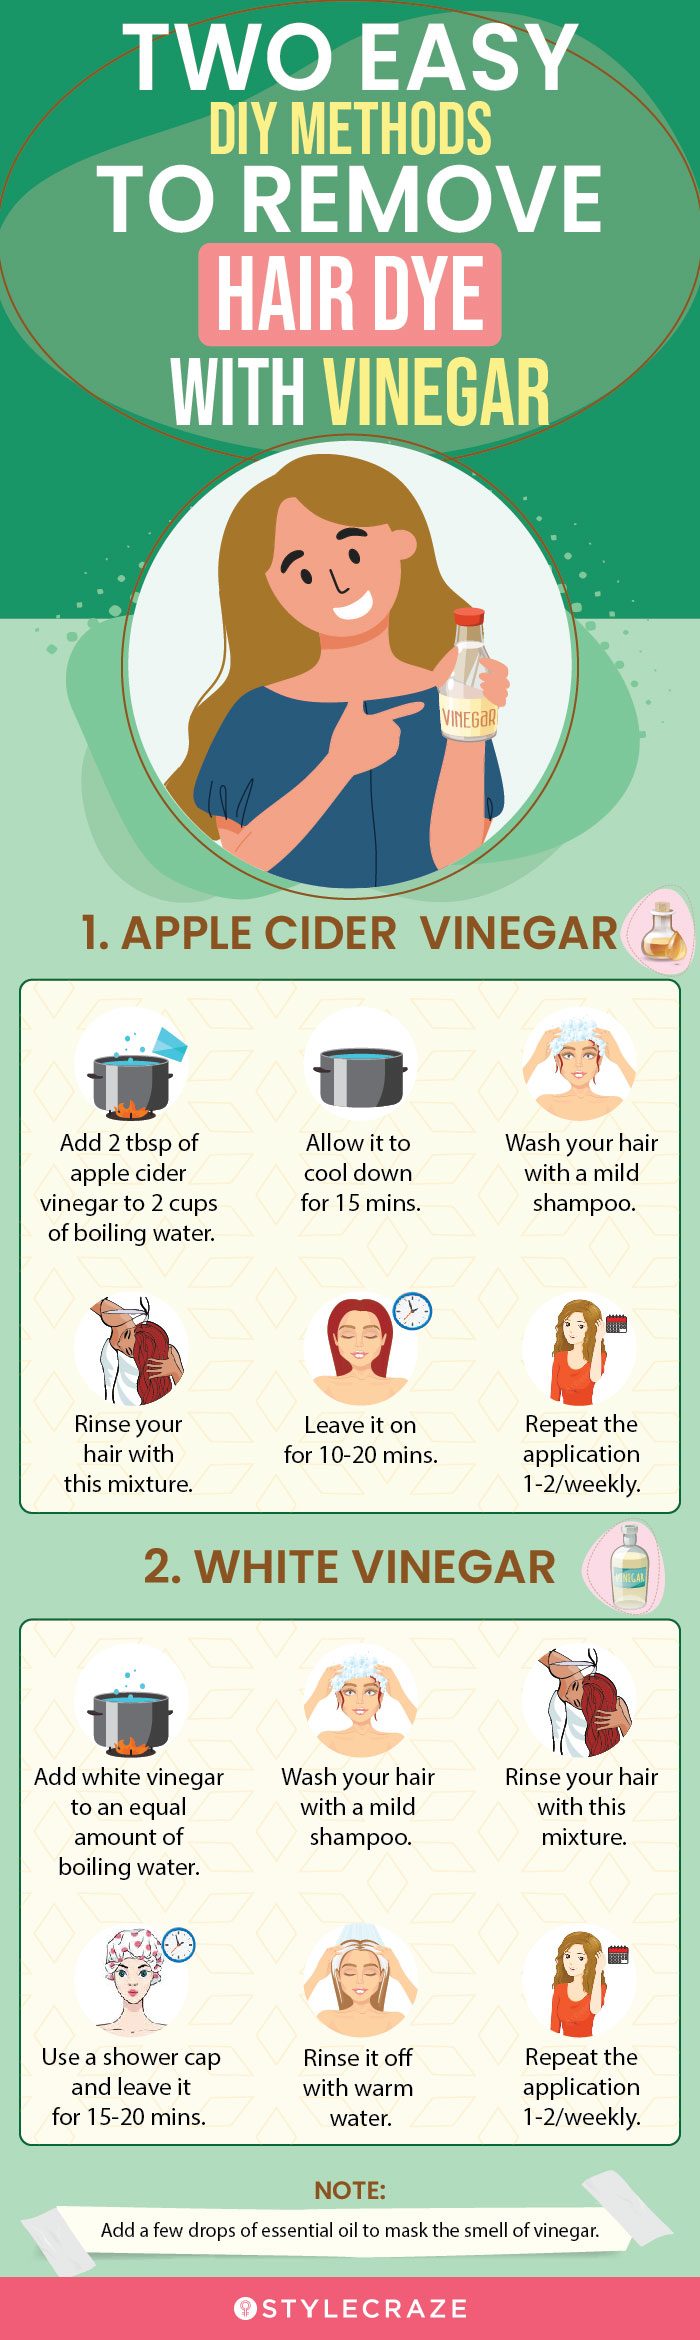 two easy diy methods to remove hair dye with vinegar [infographic]